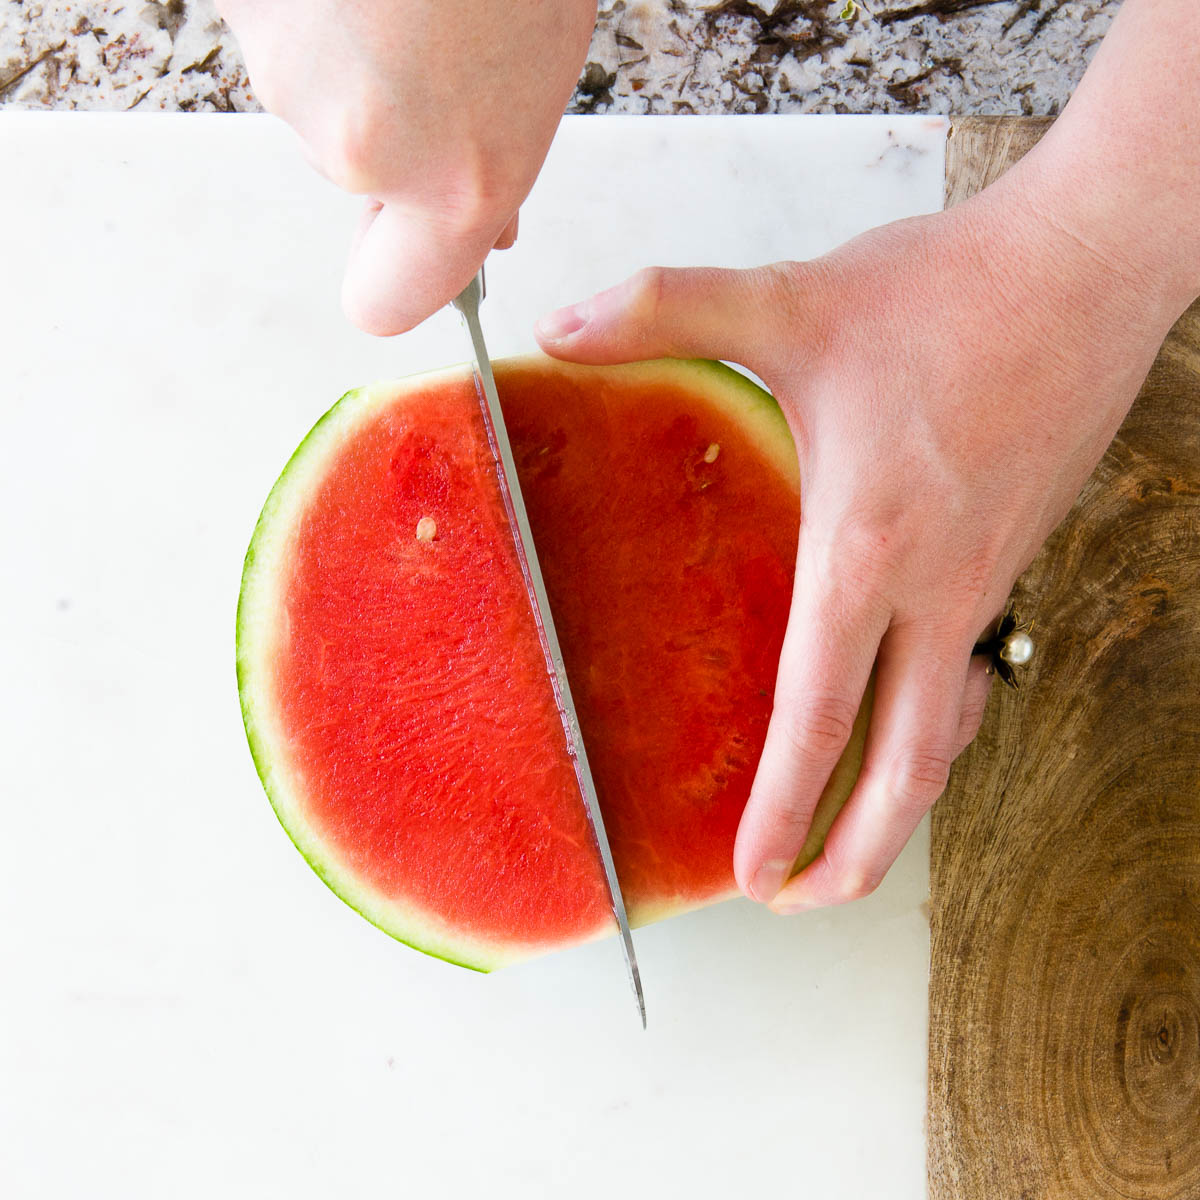 showing how to cut a watermelon by slicing 1/2 into 2 pieces on a marble and wood cutting board.